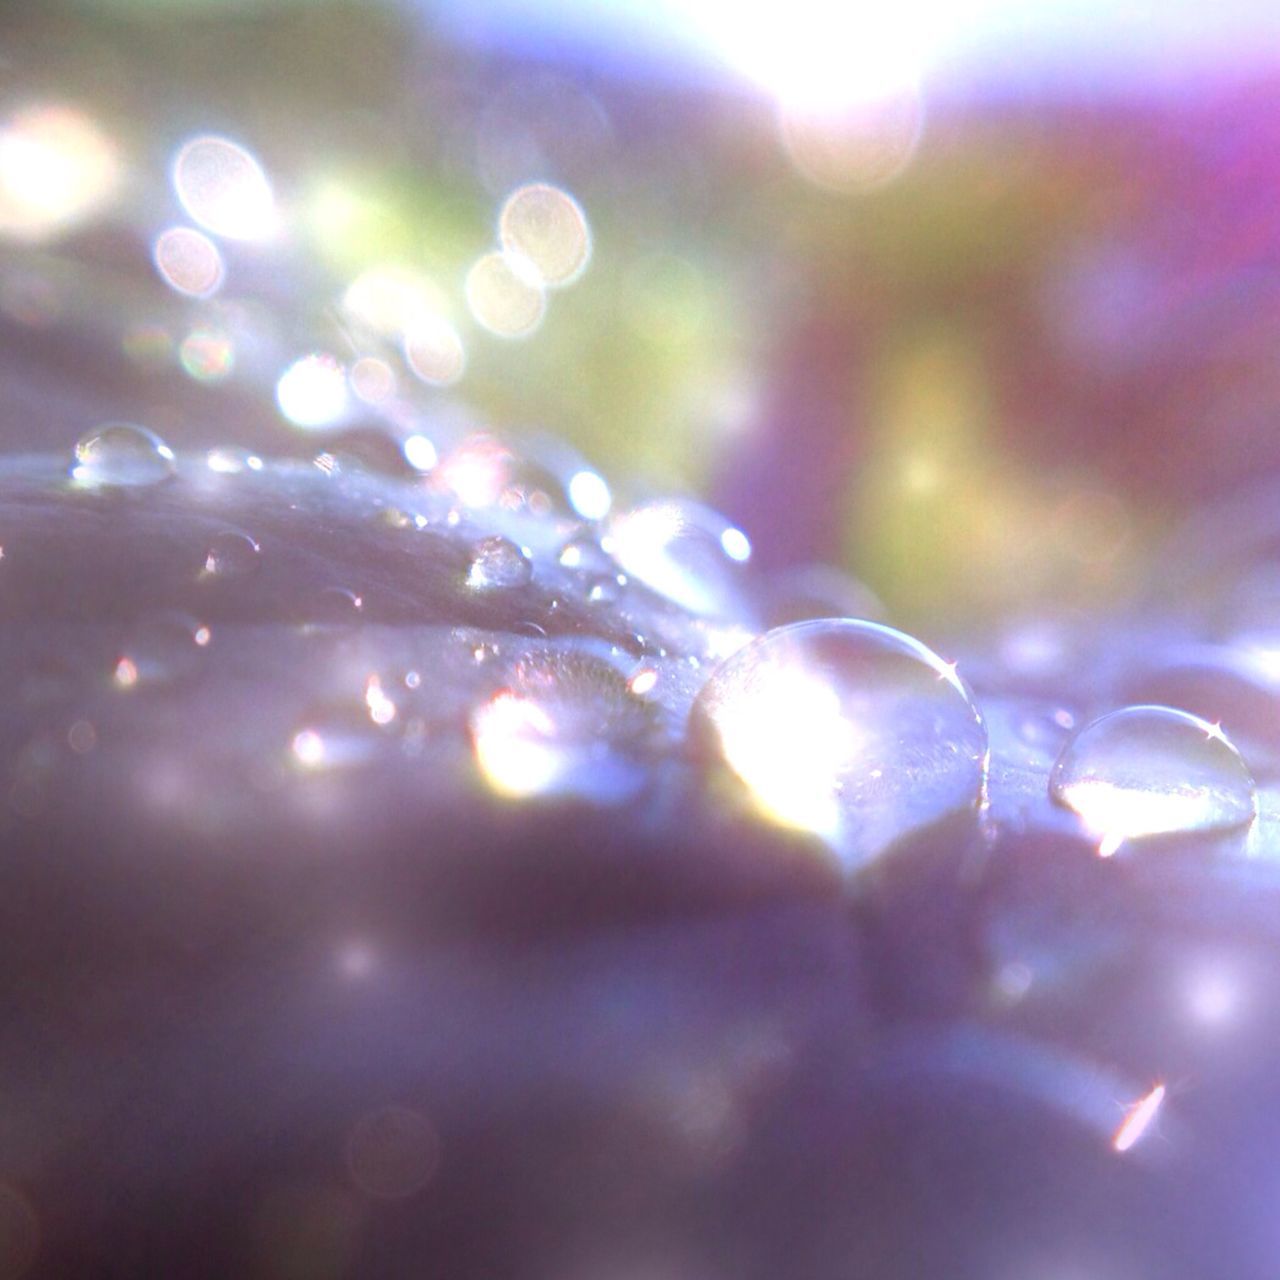 drop, lens flare, defocused, focus on foreground, close-up, water, wet, selective focus, illuminated, fragility, nature, beauty in nature, shiny, transparent, purity, glowing, no people, rain, season, dew